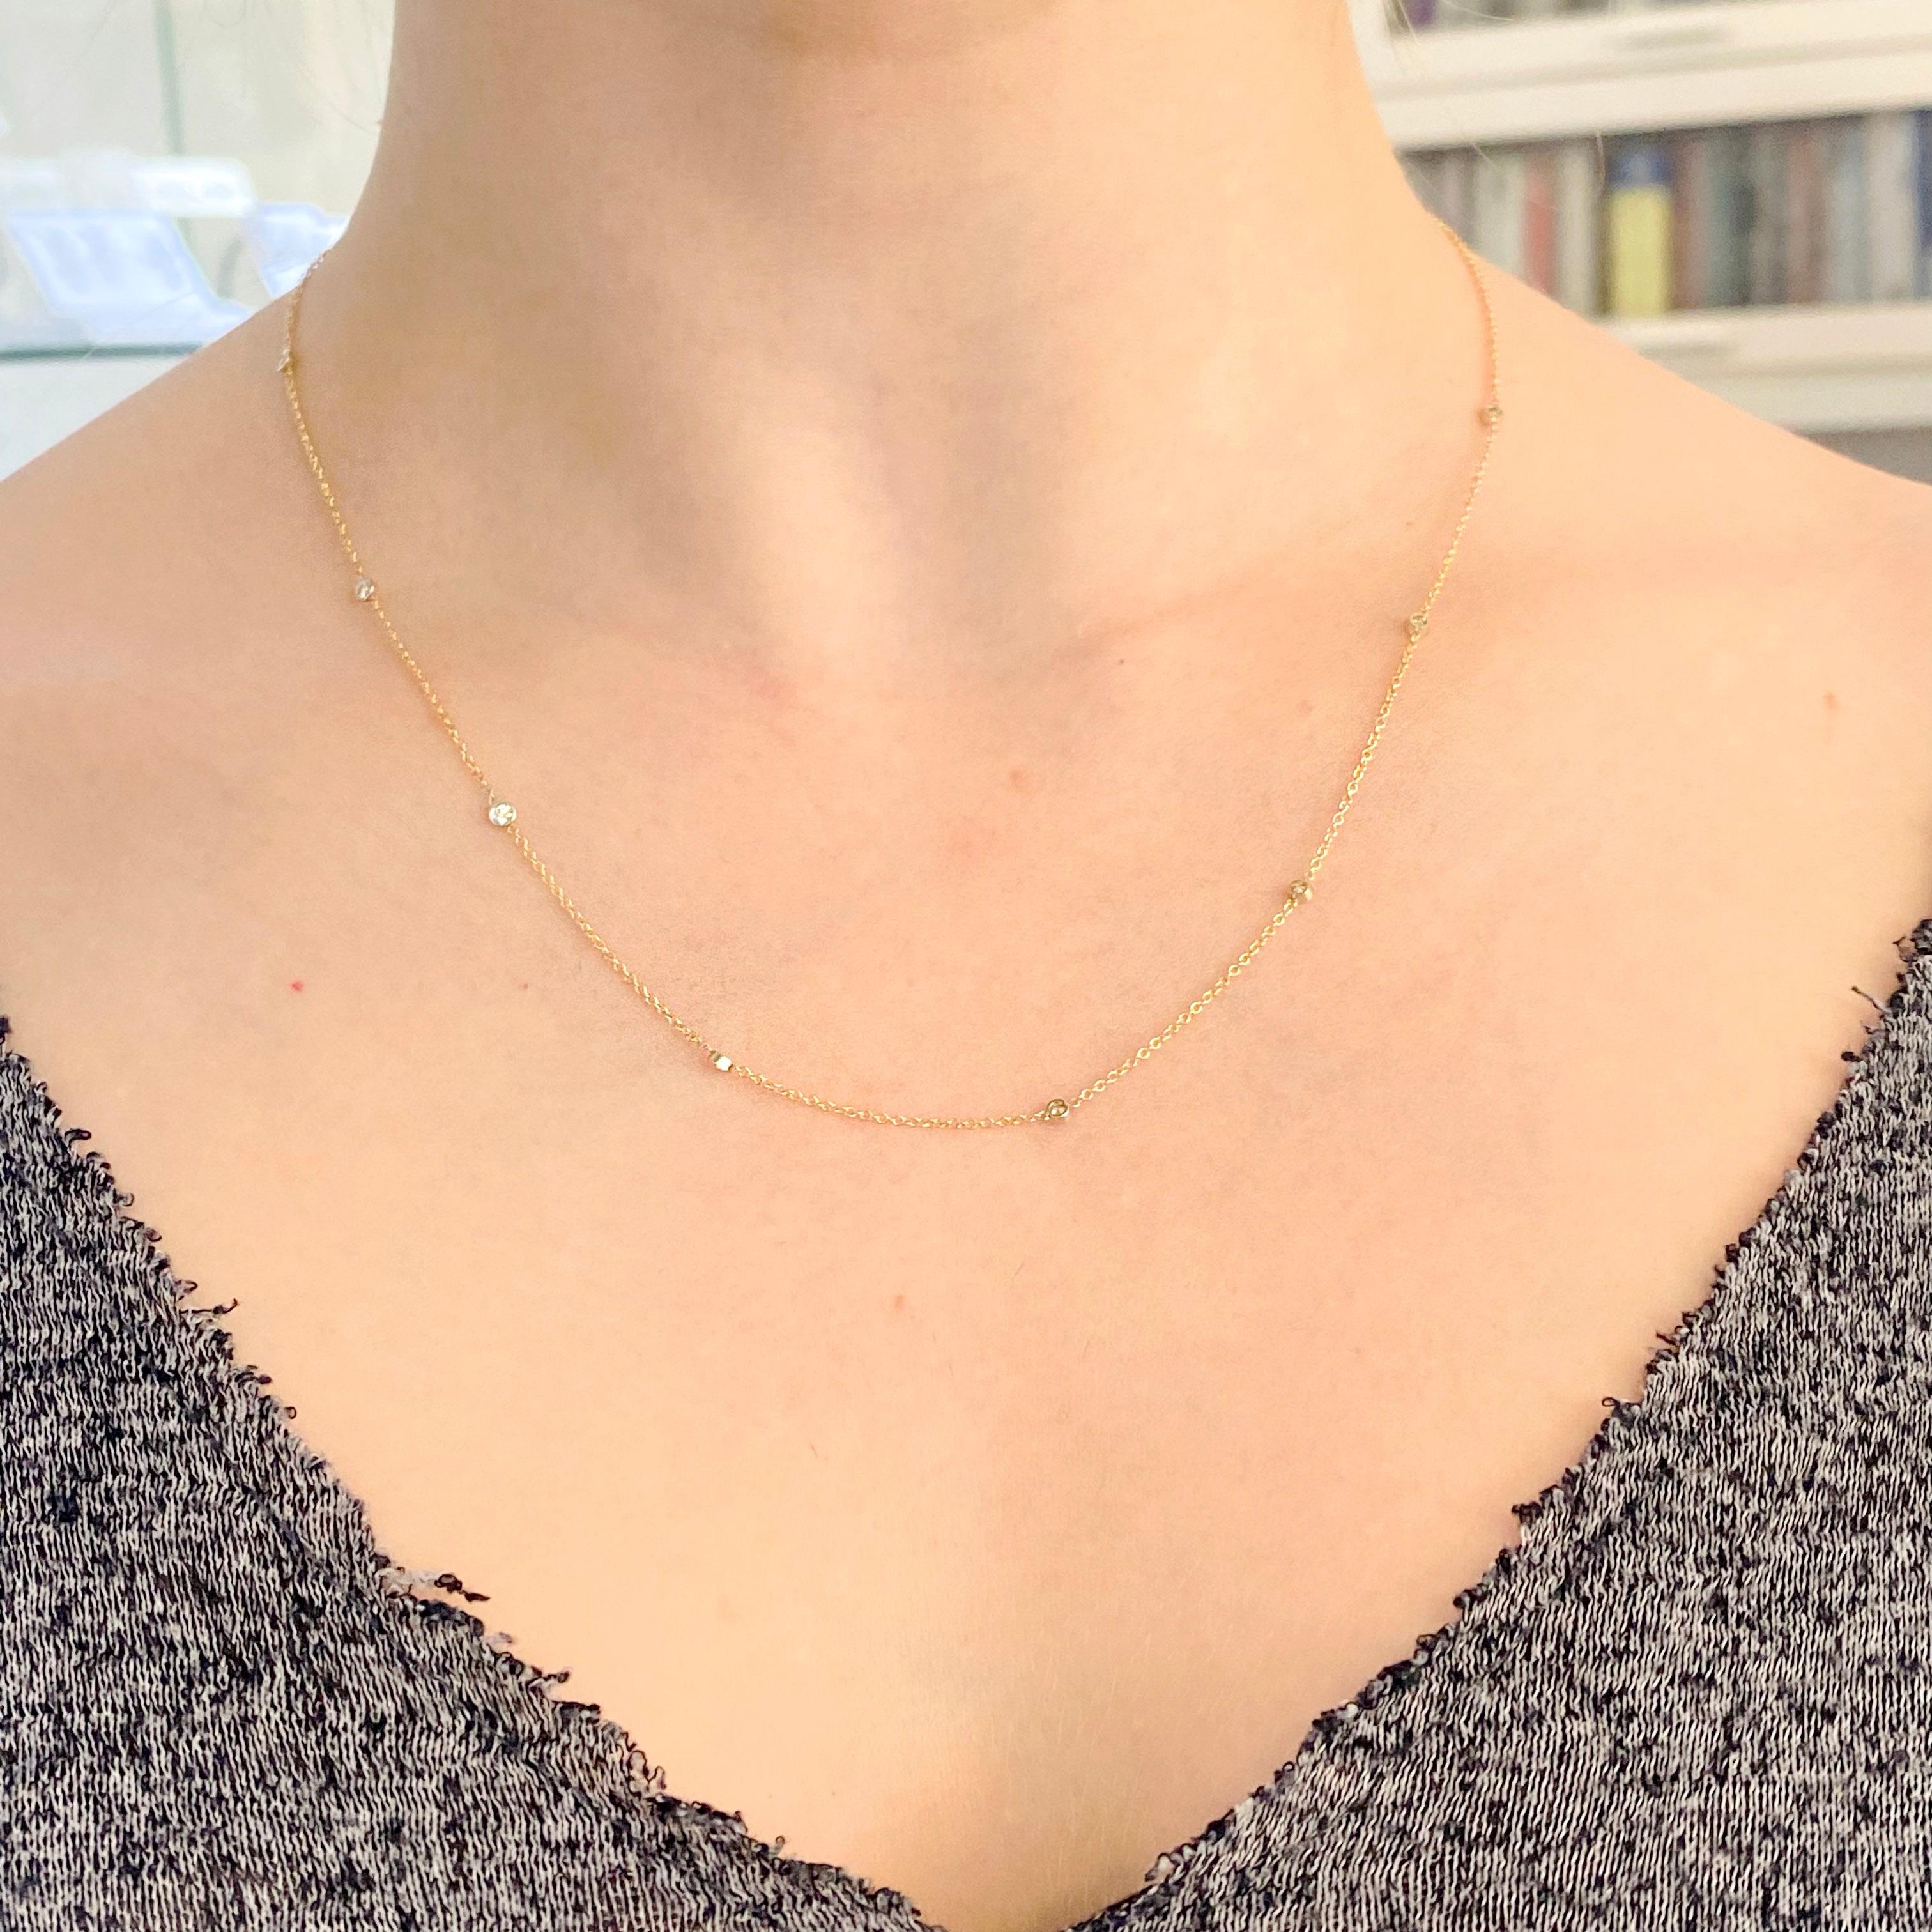 Diamonds by the yard necklace has 8 diamond stations that are set in 14 karat white gold bezels and connected with 14 karat yellow gold cable chain. The necklace is great by itself, or you can wear it with a pendant on it or you can layer it with